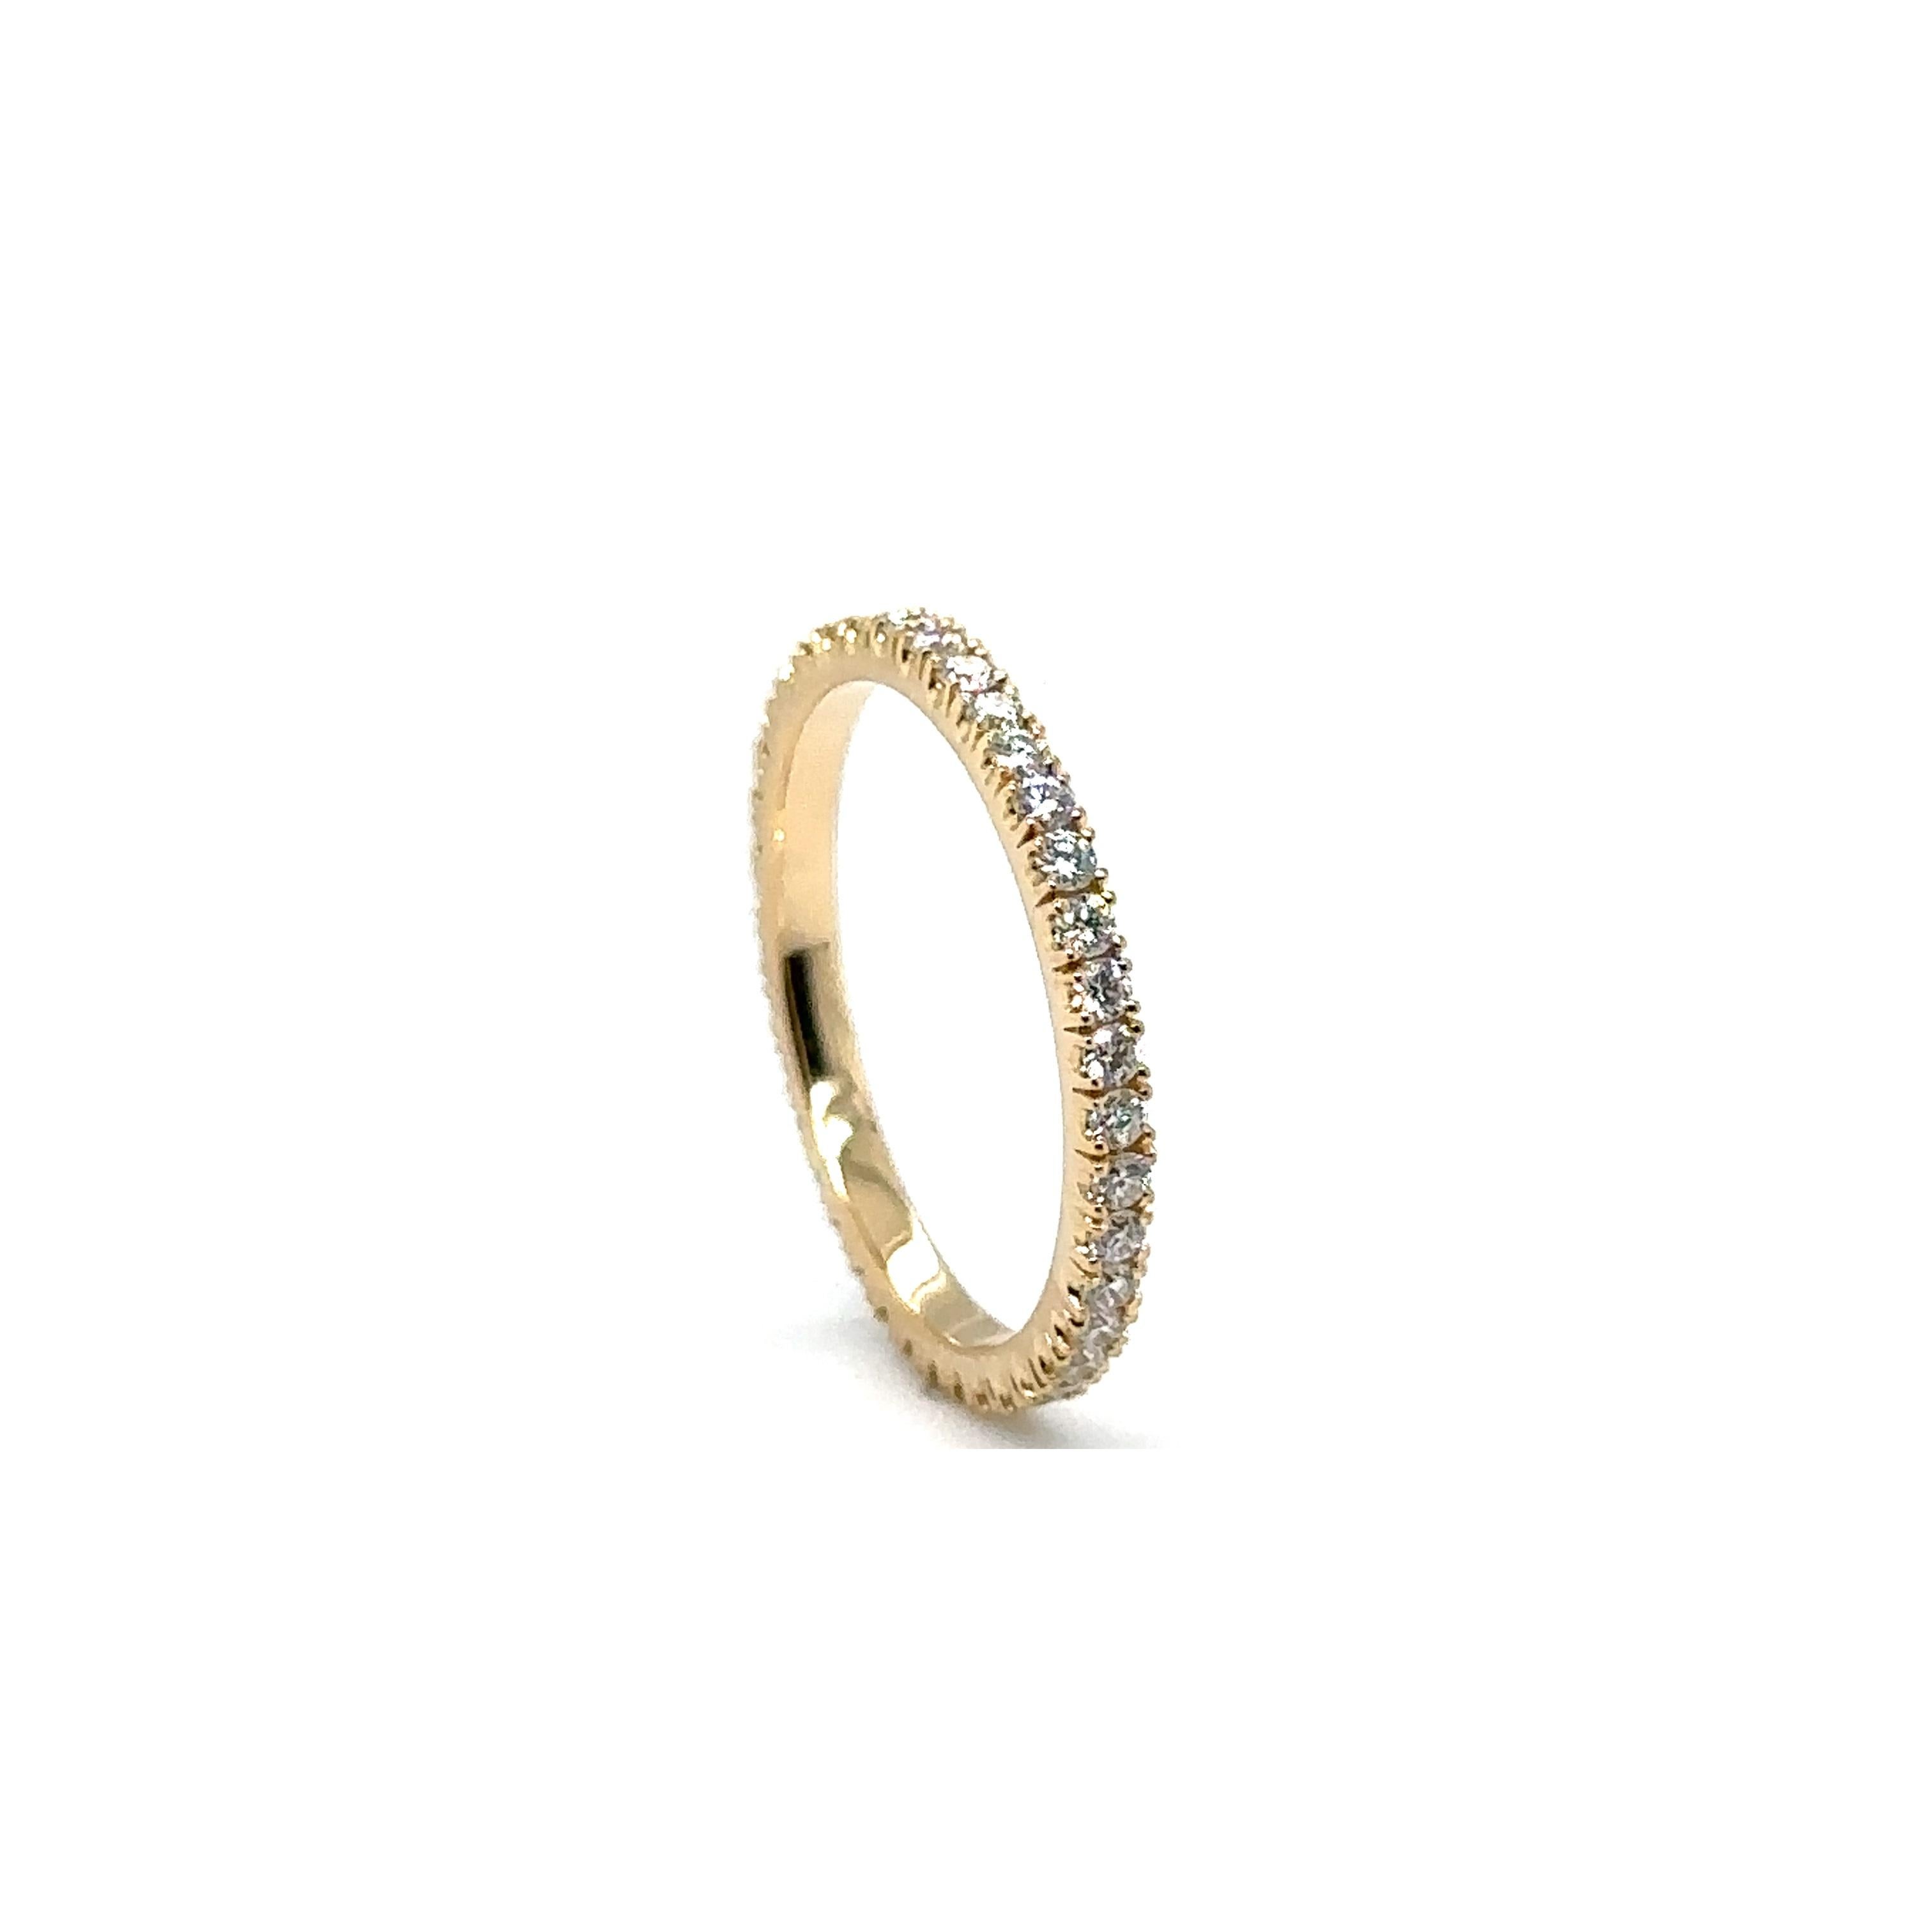 18KY WEDDING BAND with 0.52 CWT DIAMONDS
Metal: 18K YELLOW GOLD
Diamond Info: 
39-G/VS ROUND BRILLIANT DIAMONDS
SETTING MICRO PAVE MUSHROOM  
Total Ct Weight: 0.52 cwt.
Item Weight: 1.91 gm
Ring Size: 6 ¼ (Can be sized up to 6 ½)
Measurements:  1.90